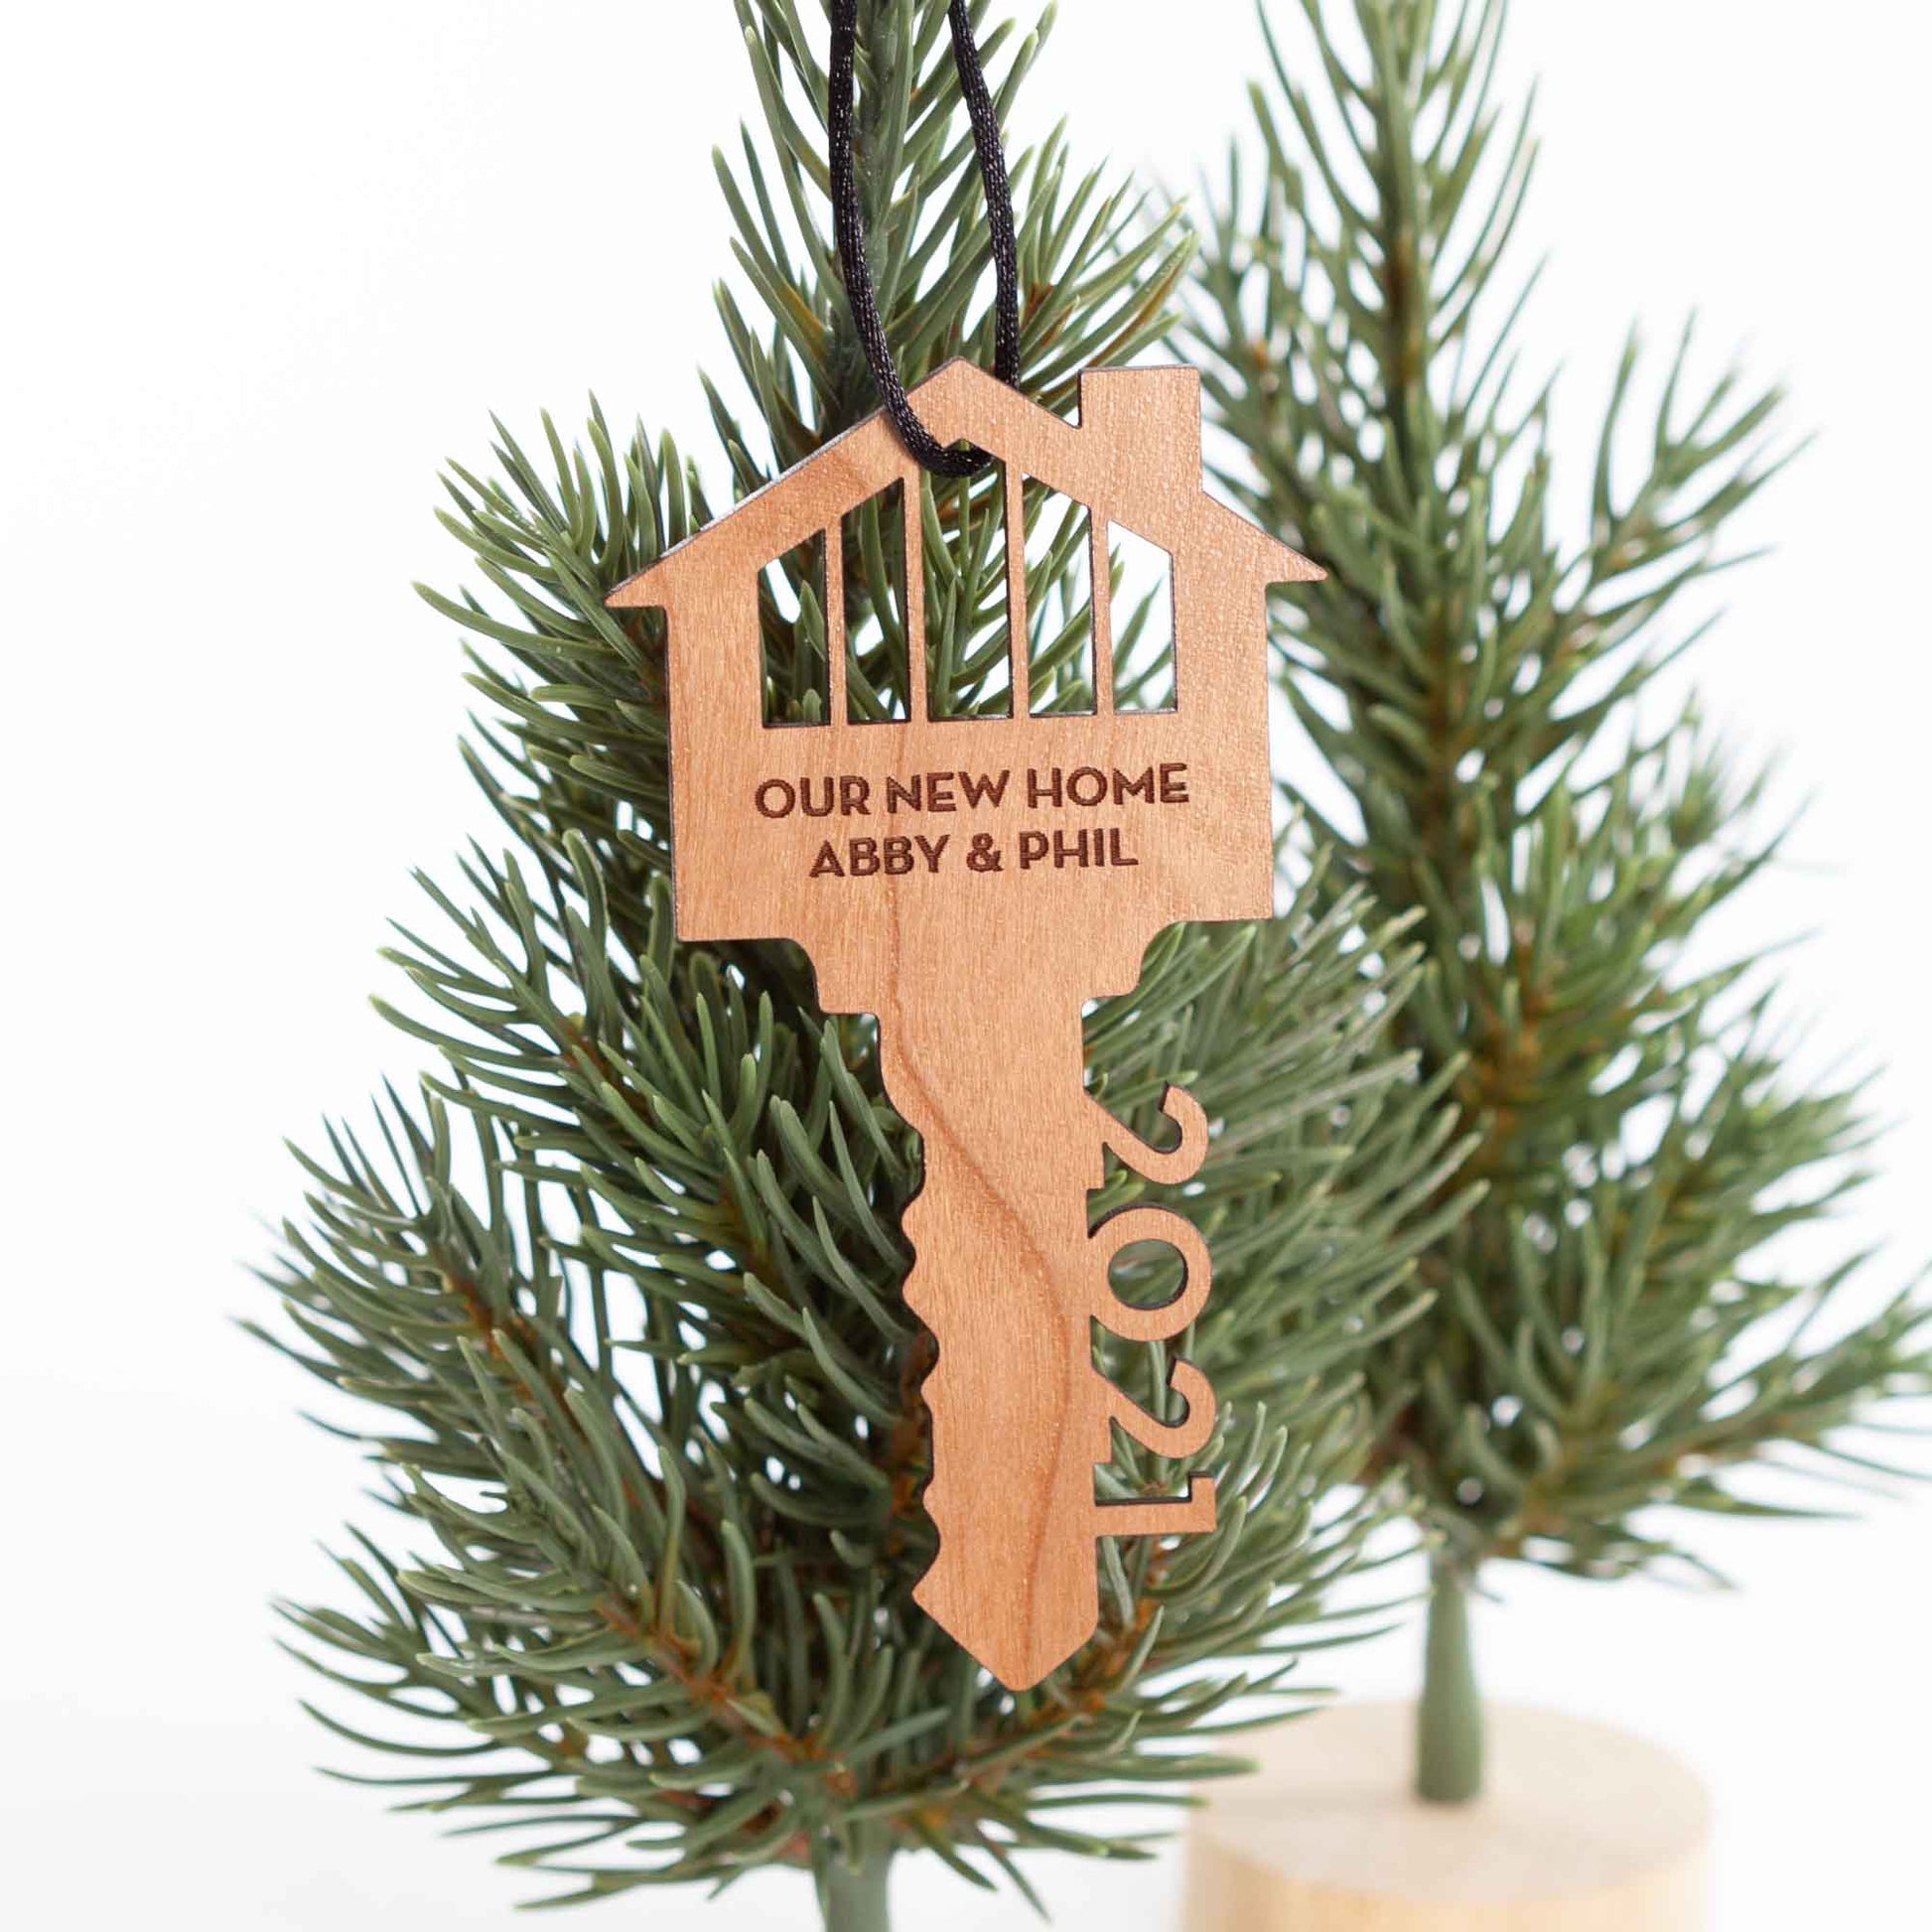 Custom Wood Ornaments - New Home Key Laser Cut and Laser Engraved in Cherry Wood by LeeMo Designs in Bend, Oregon